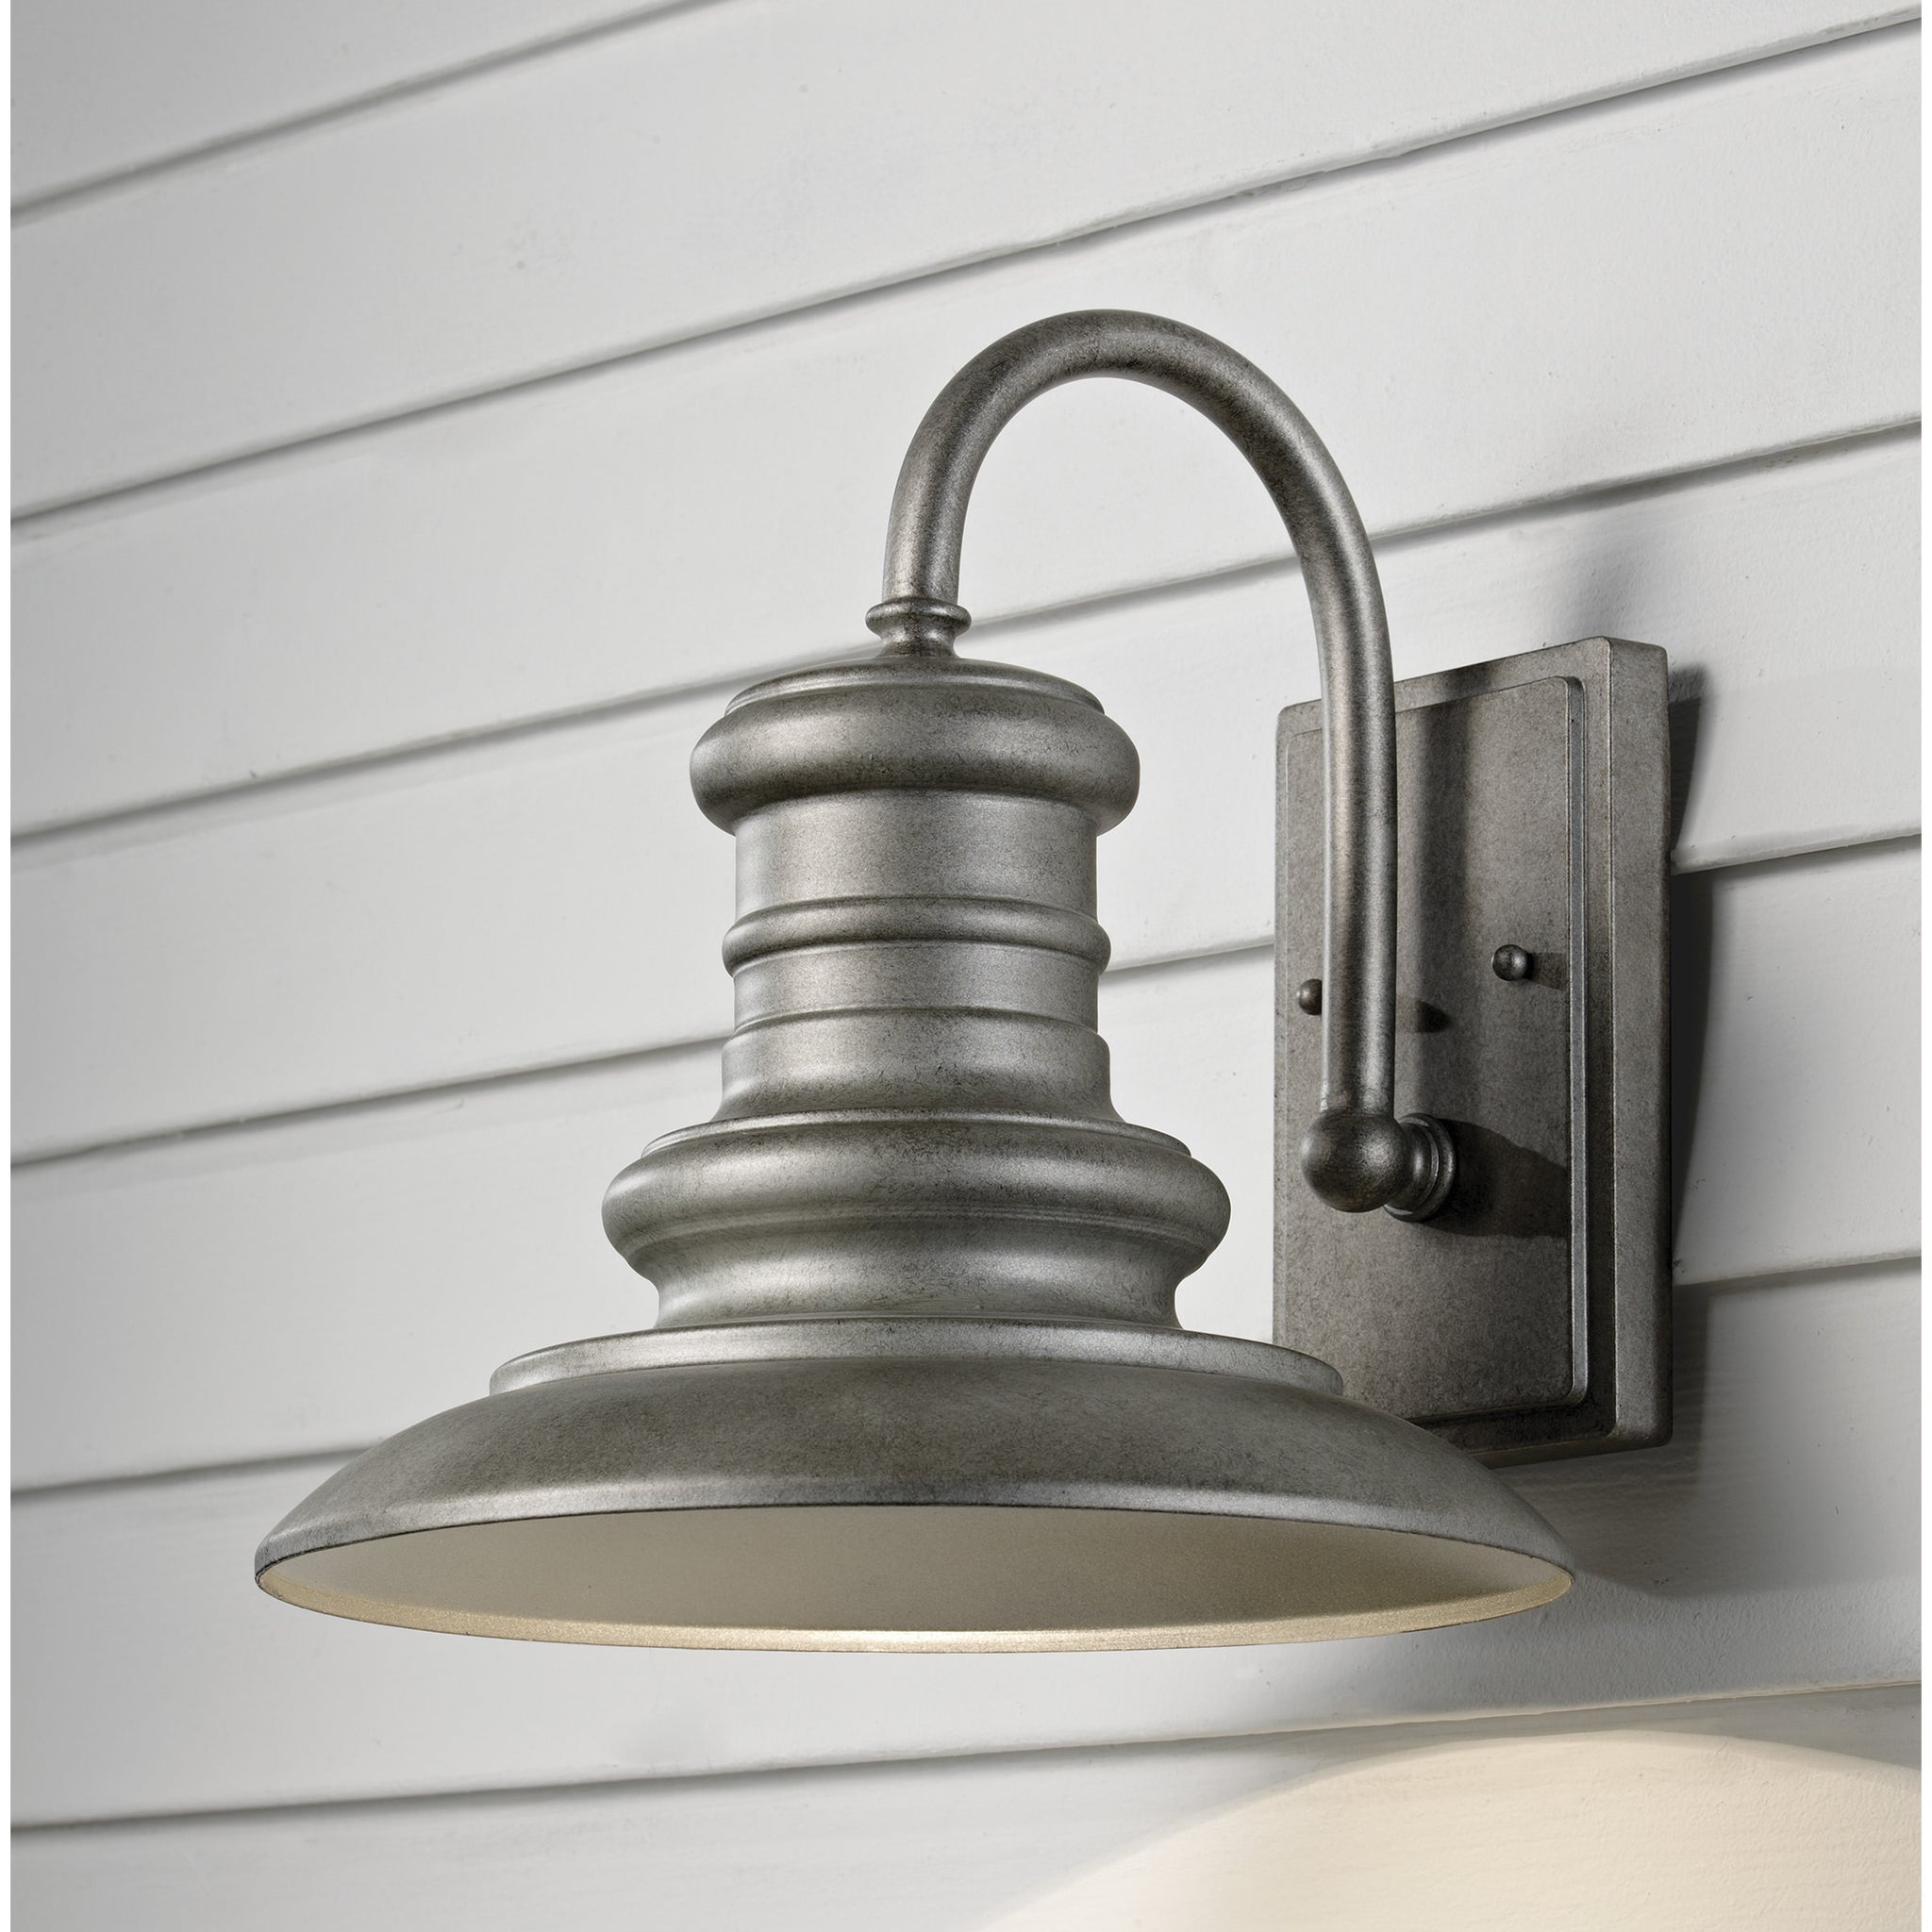 Redding Station Outdoor Wall Light Tarnished Silver